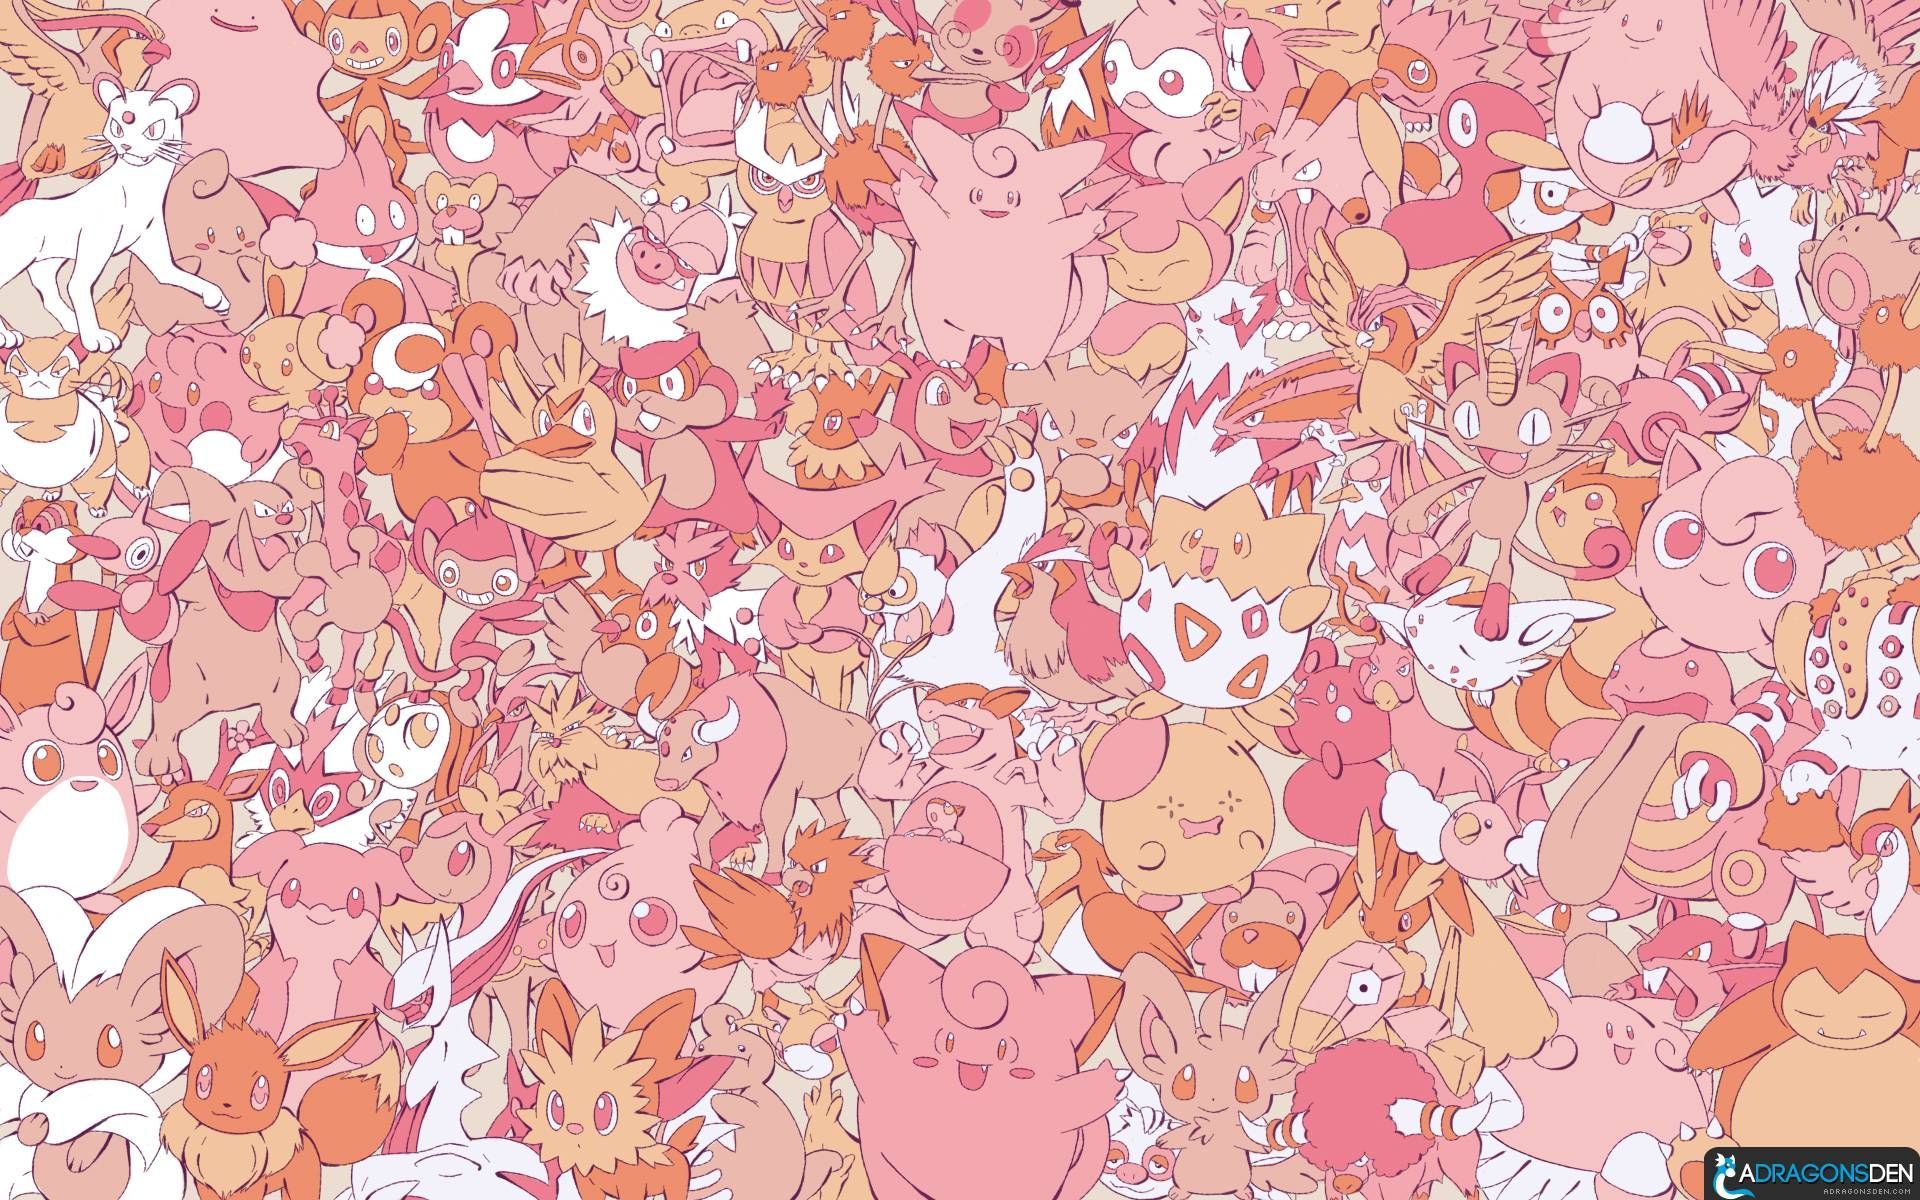 Wallpaper background of a bunch of cute pink and orange Pokemon characters - Pokemon